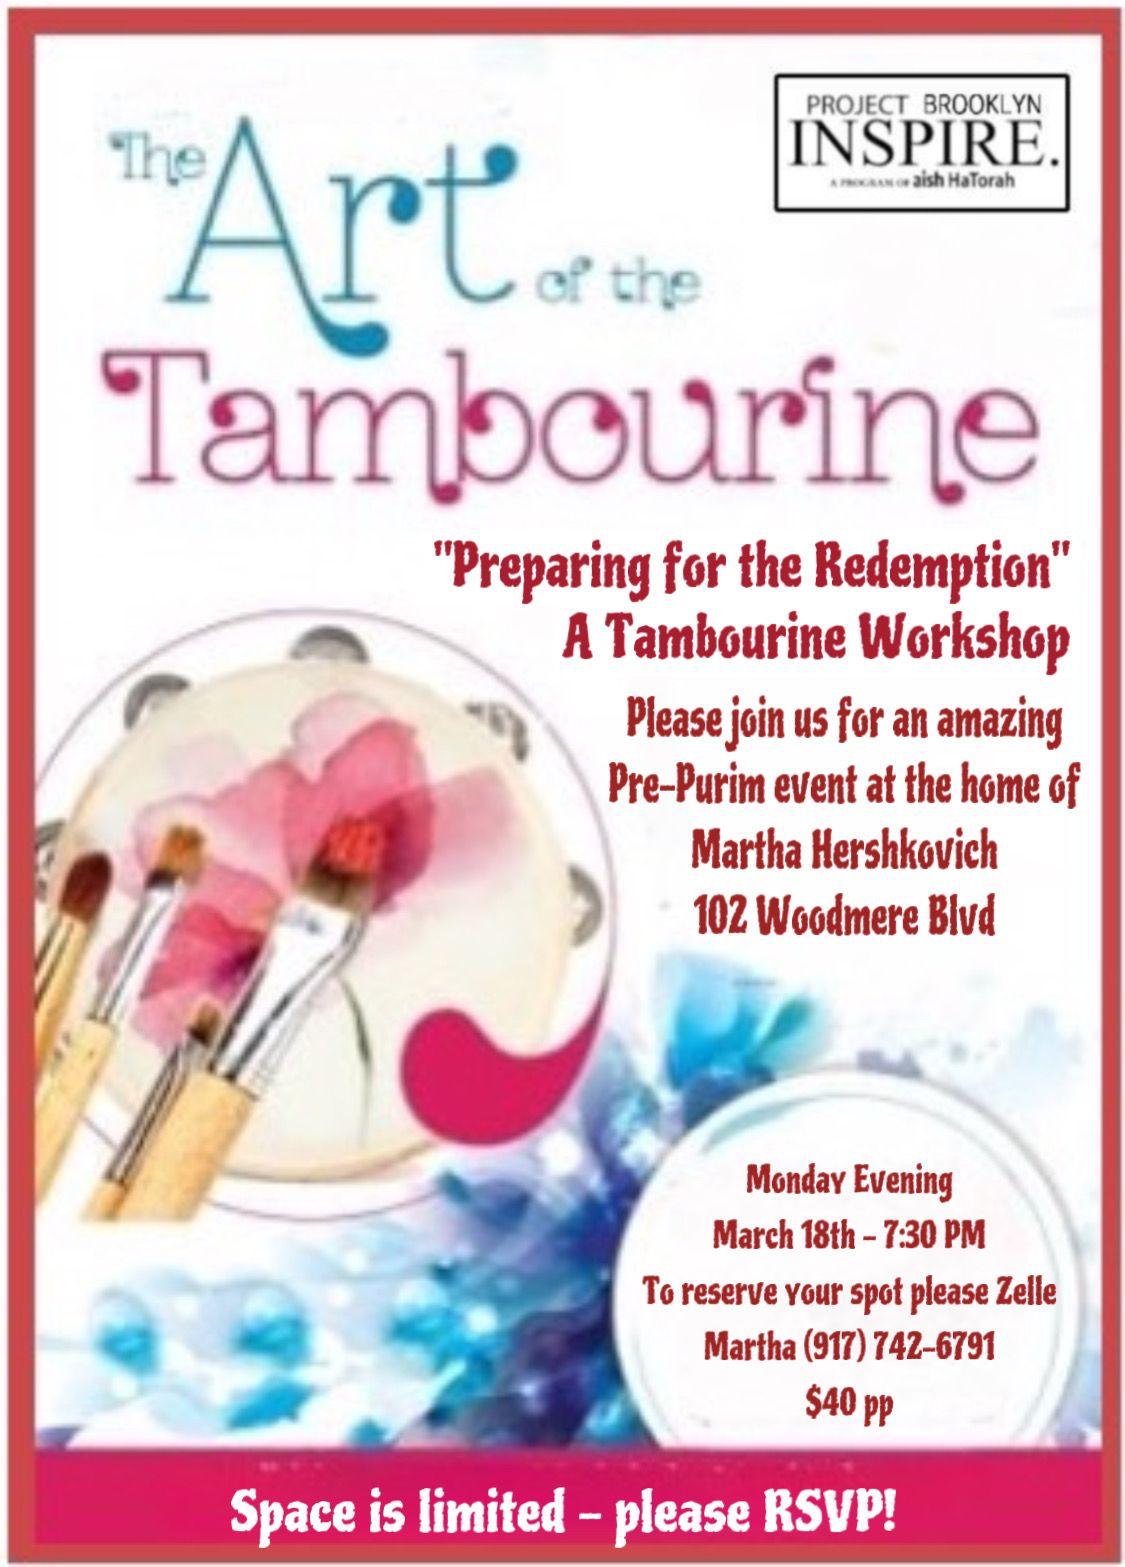 The Art of the Tambourine "Preparing for the Redemption"